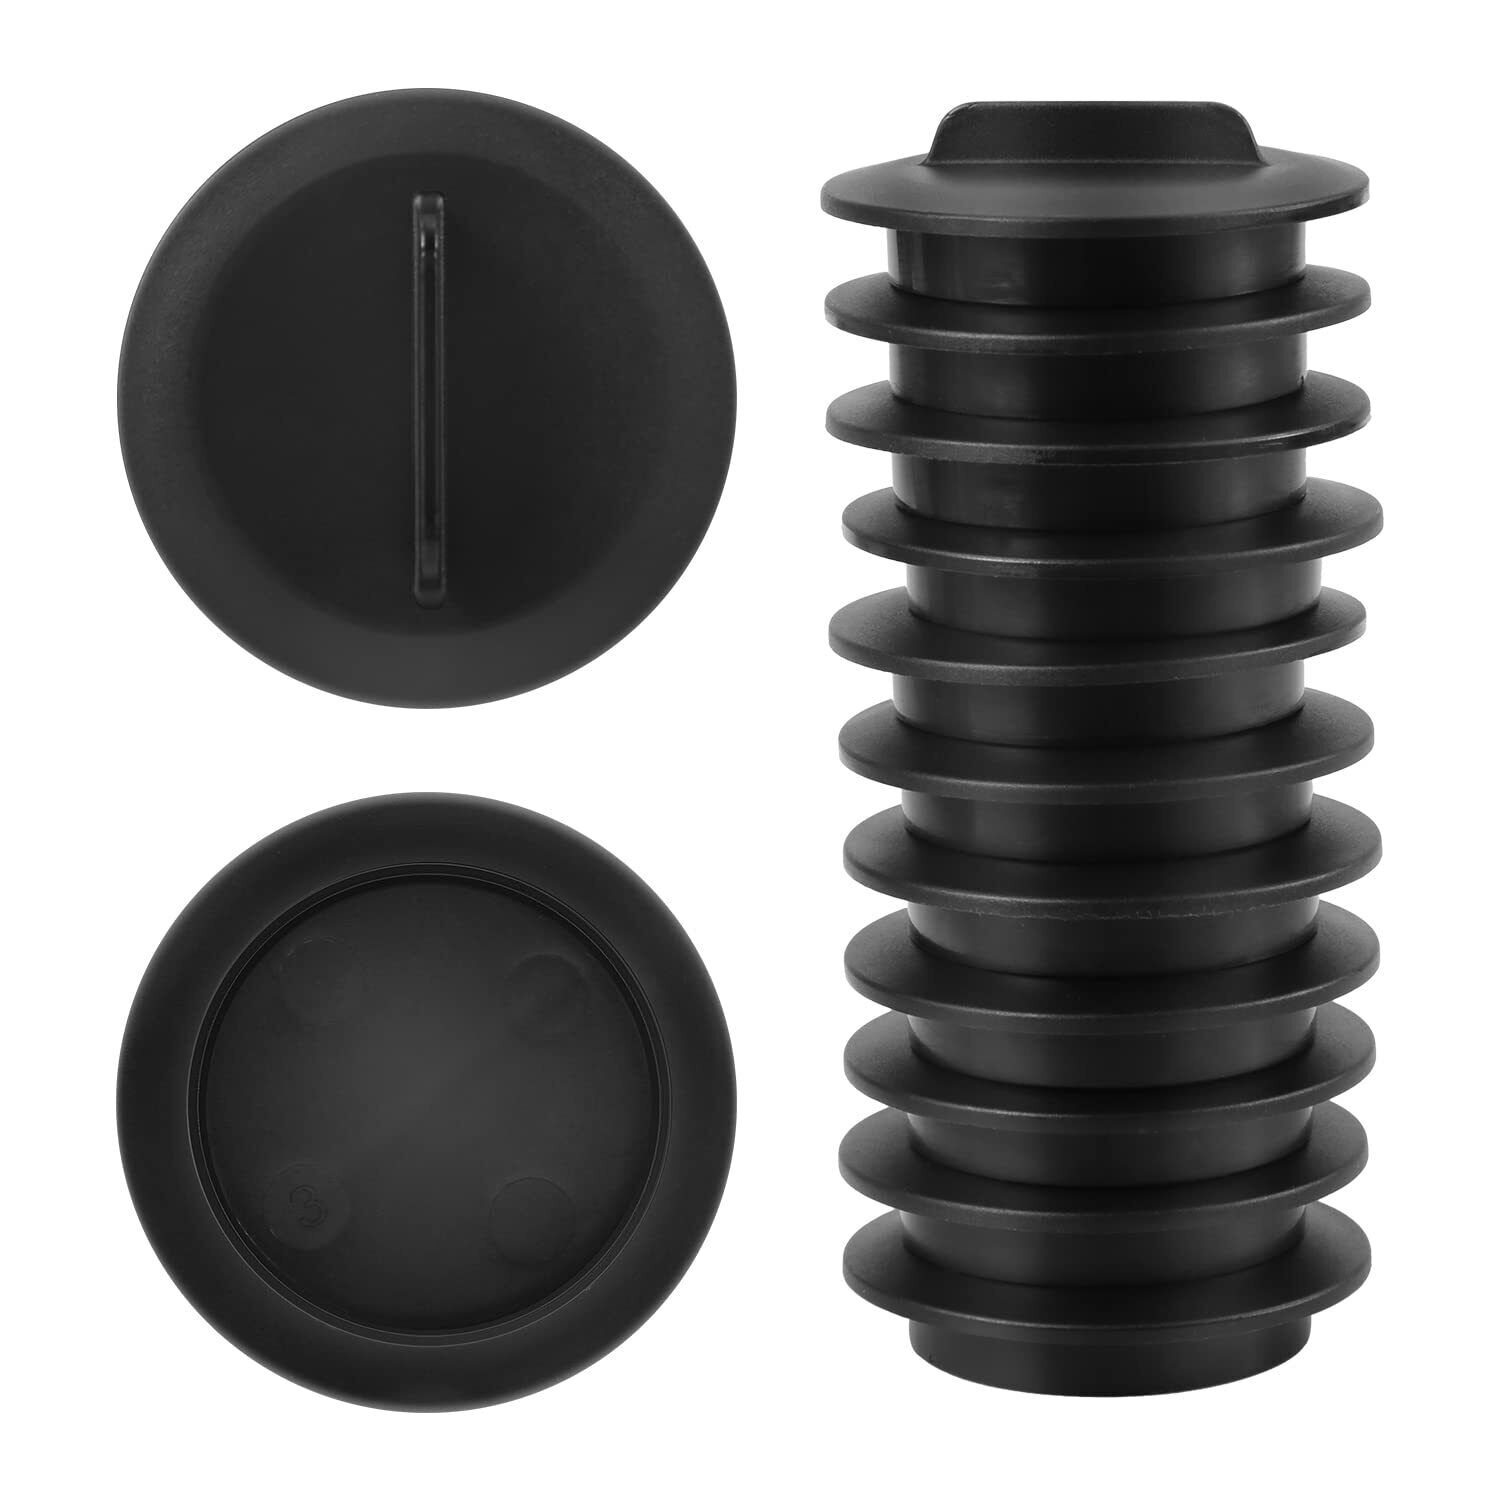 25pcs Plant Spacer Kit, Garden Plant Spacers Round Spacer Cover Plant Deck Op...